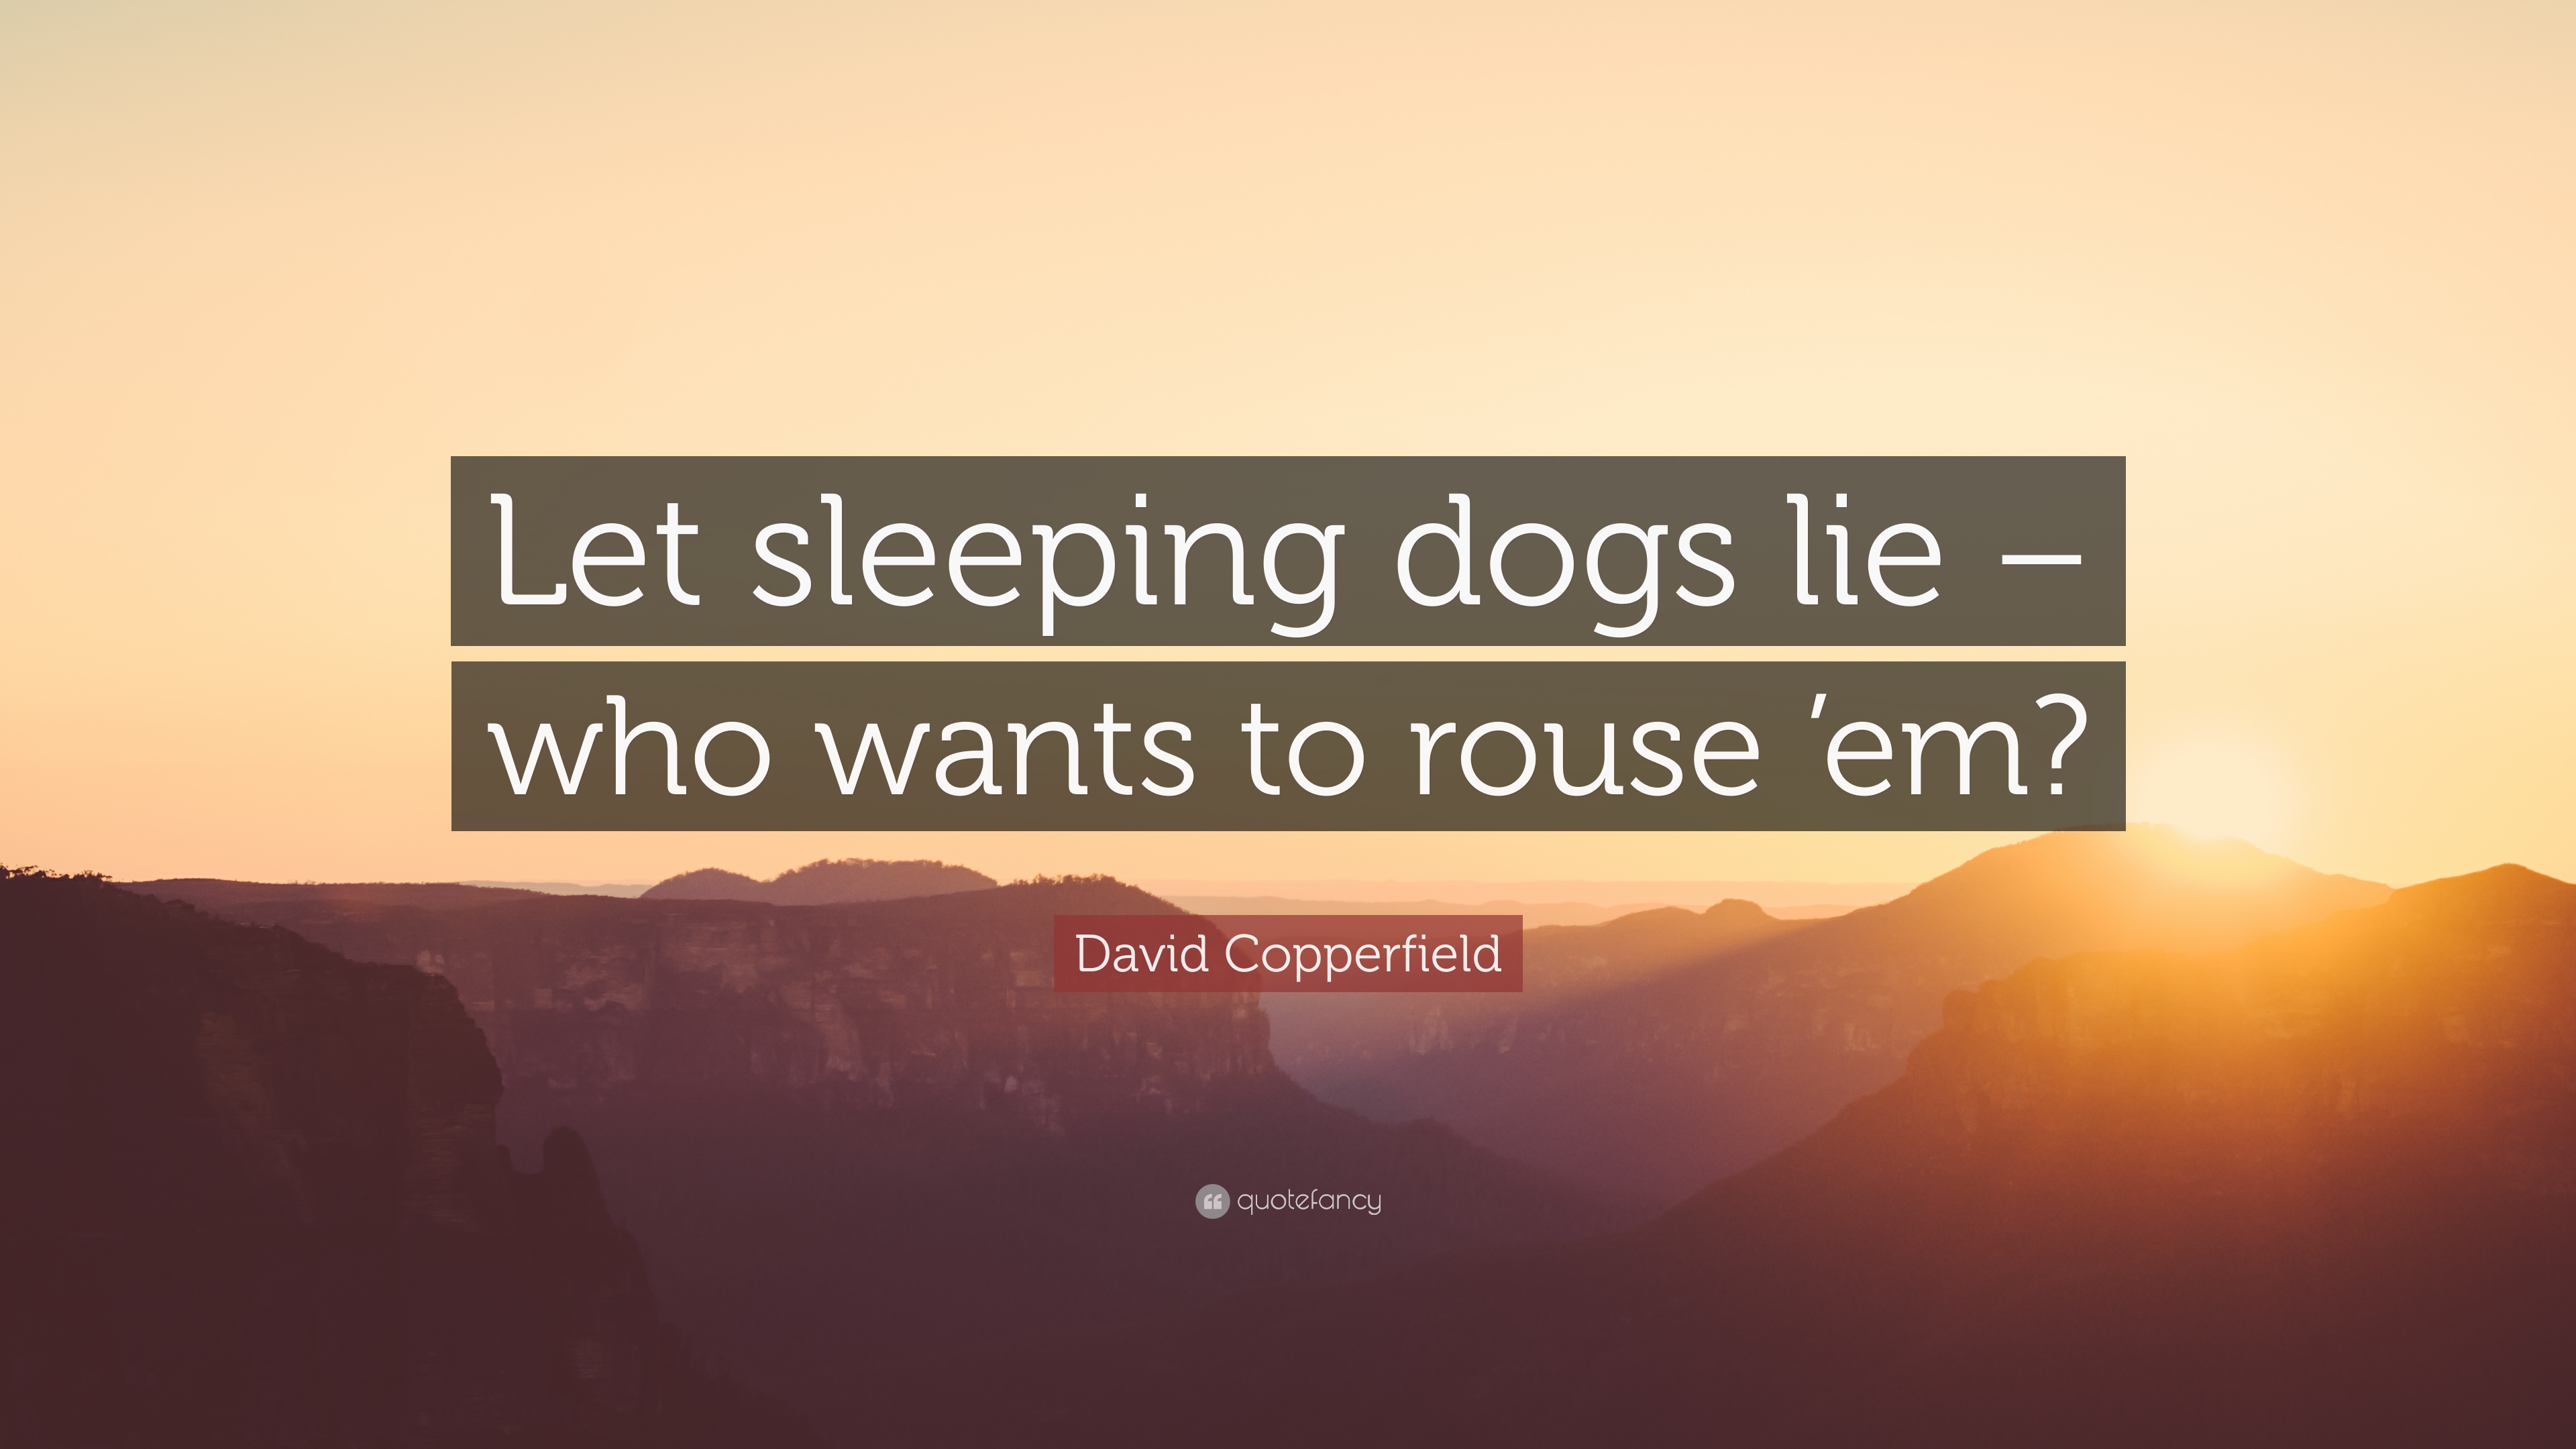 David Copperfield Quote - Quotes On Vision - HD Wallpaper 